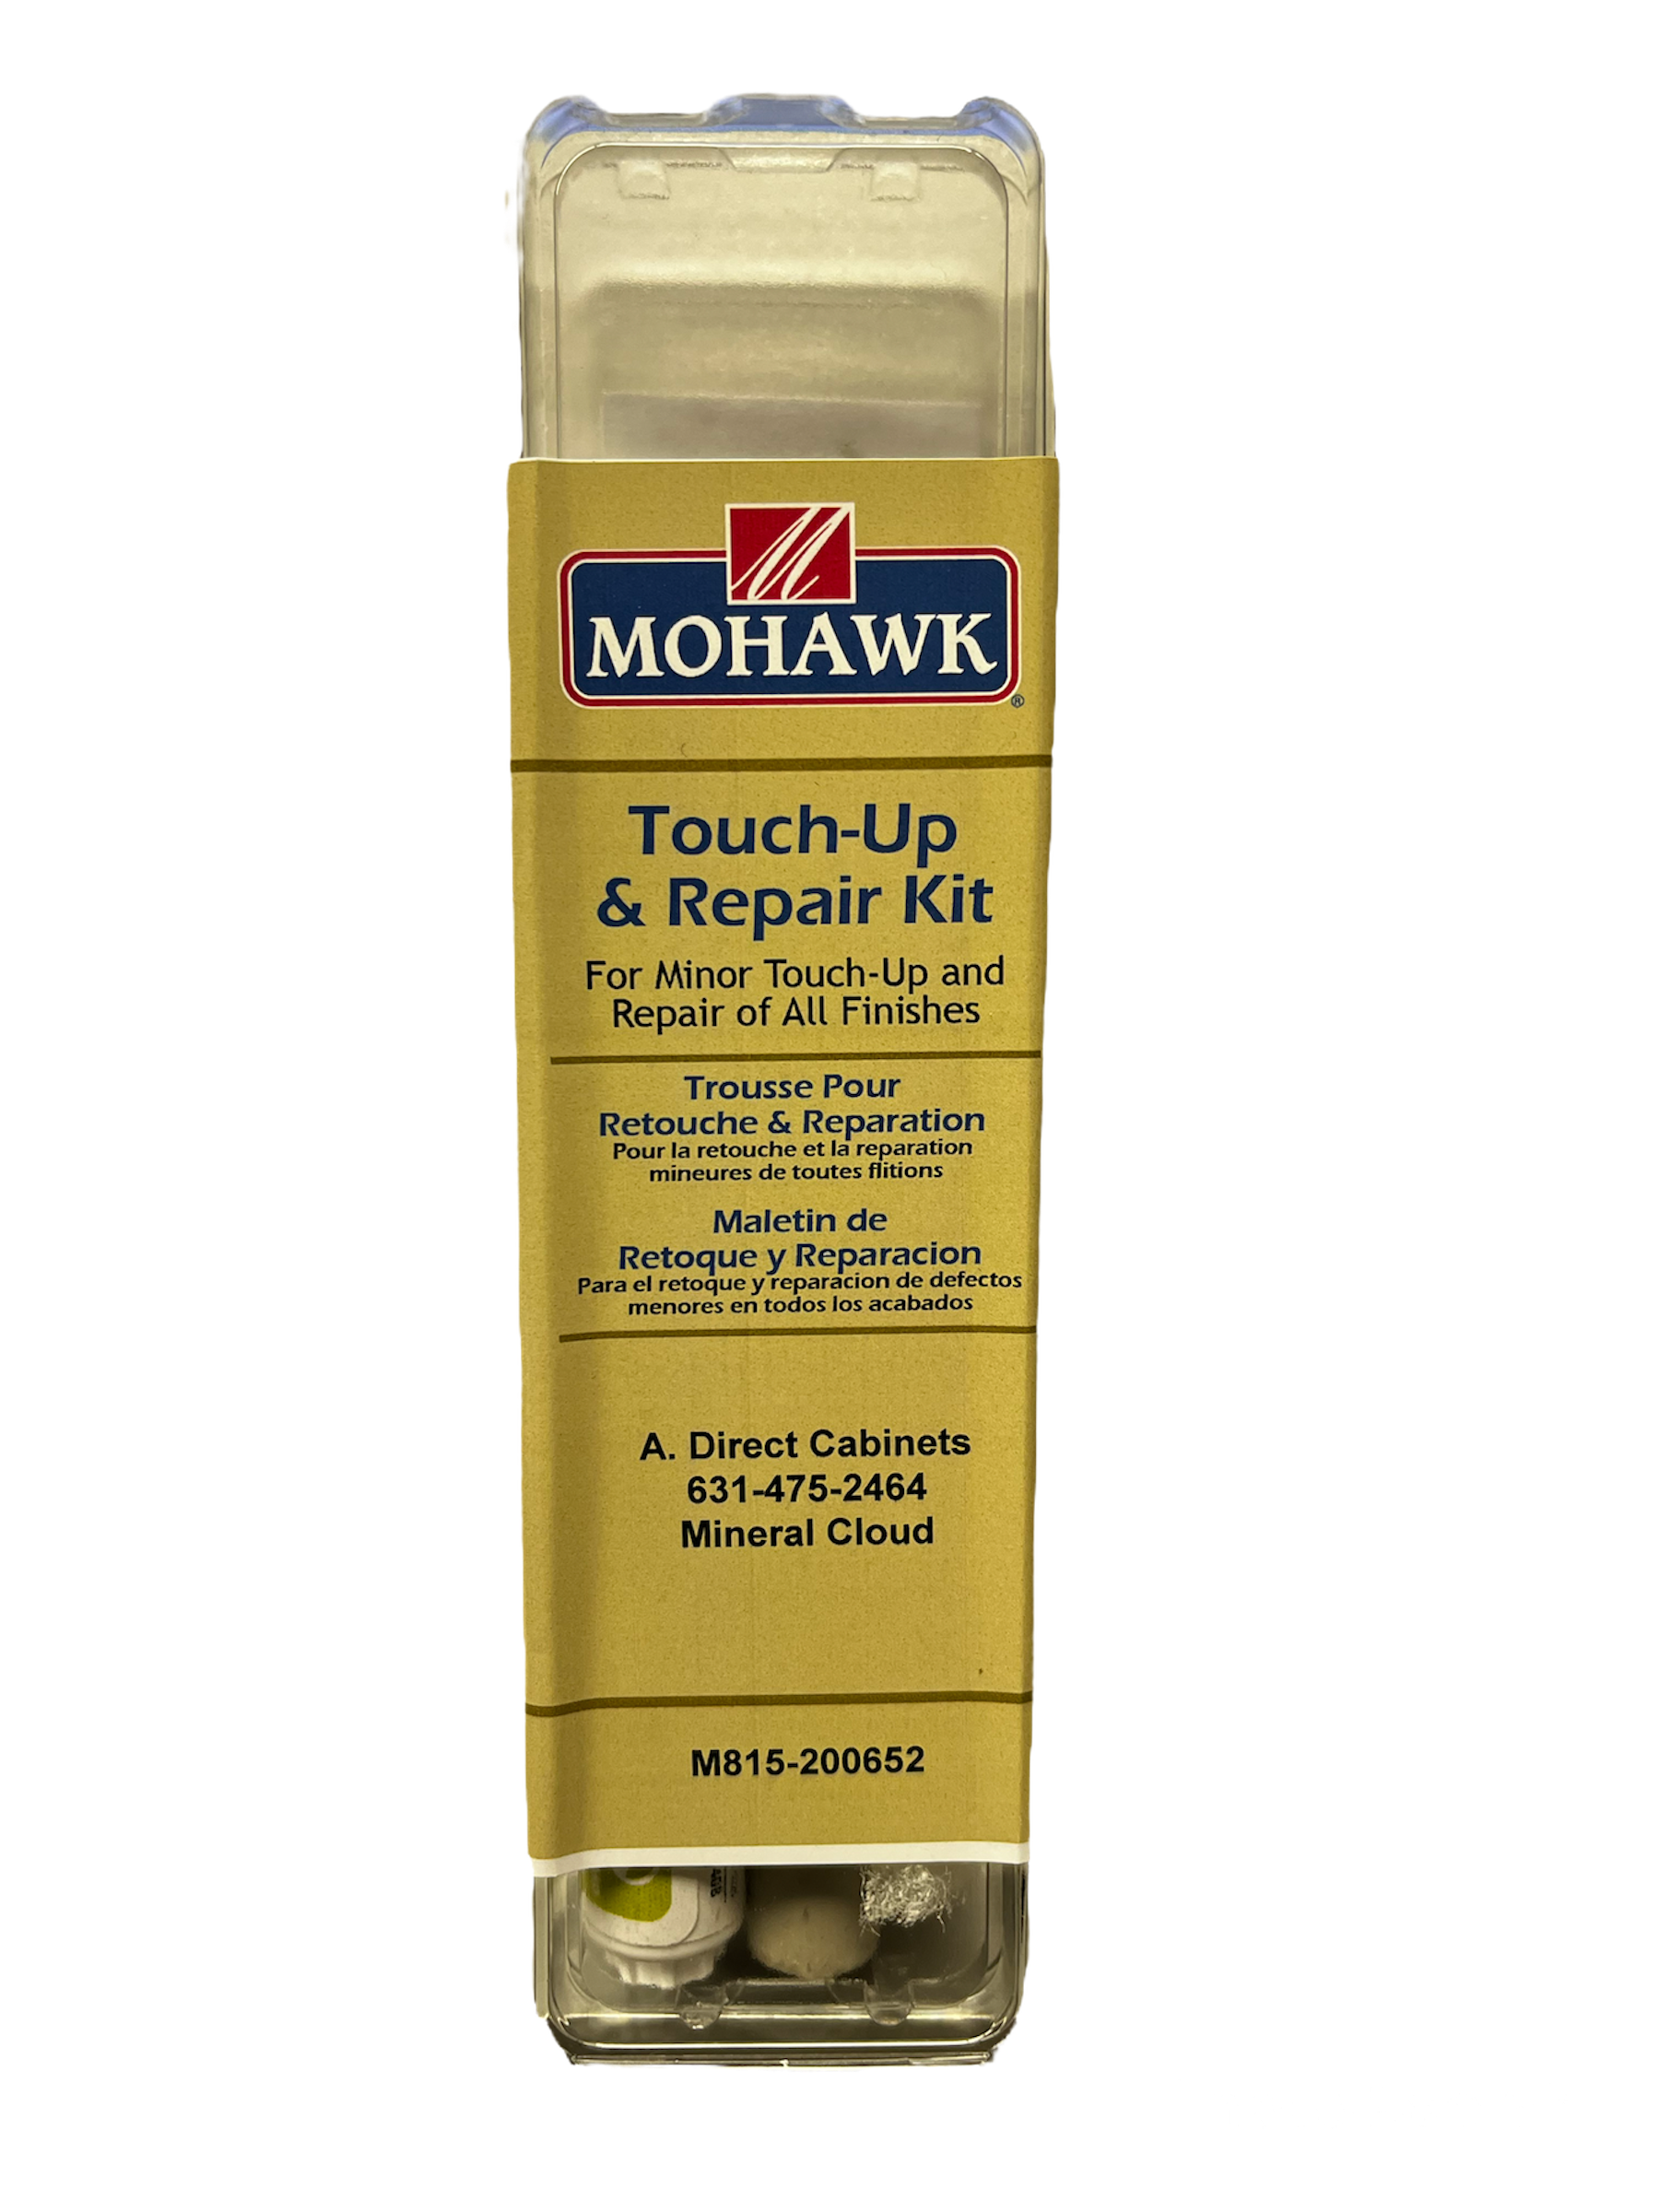 Mantra Mineral (Light Gray Paint) Touch-Up & Repair Kit for Mantra Cabinets-DirectCabinets.com